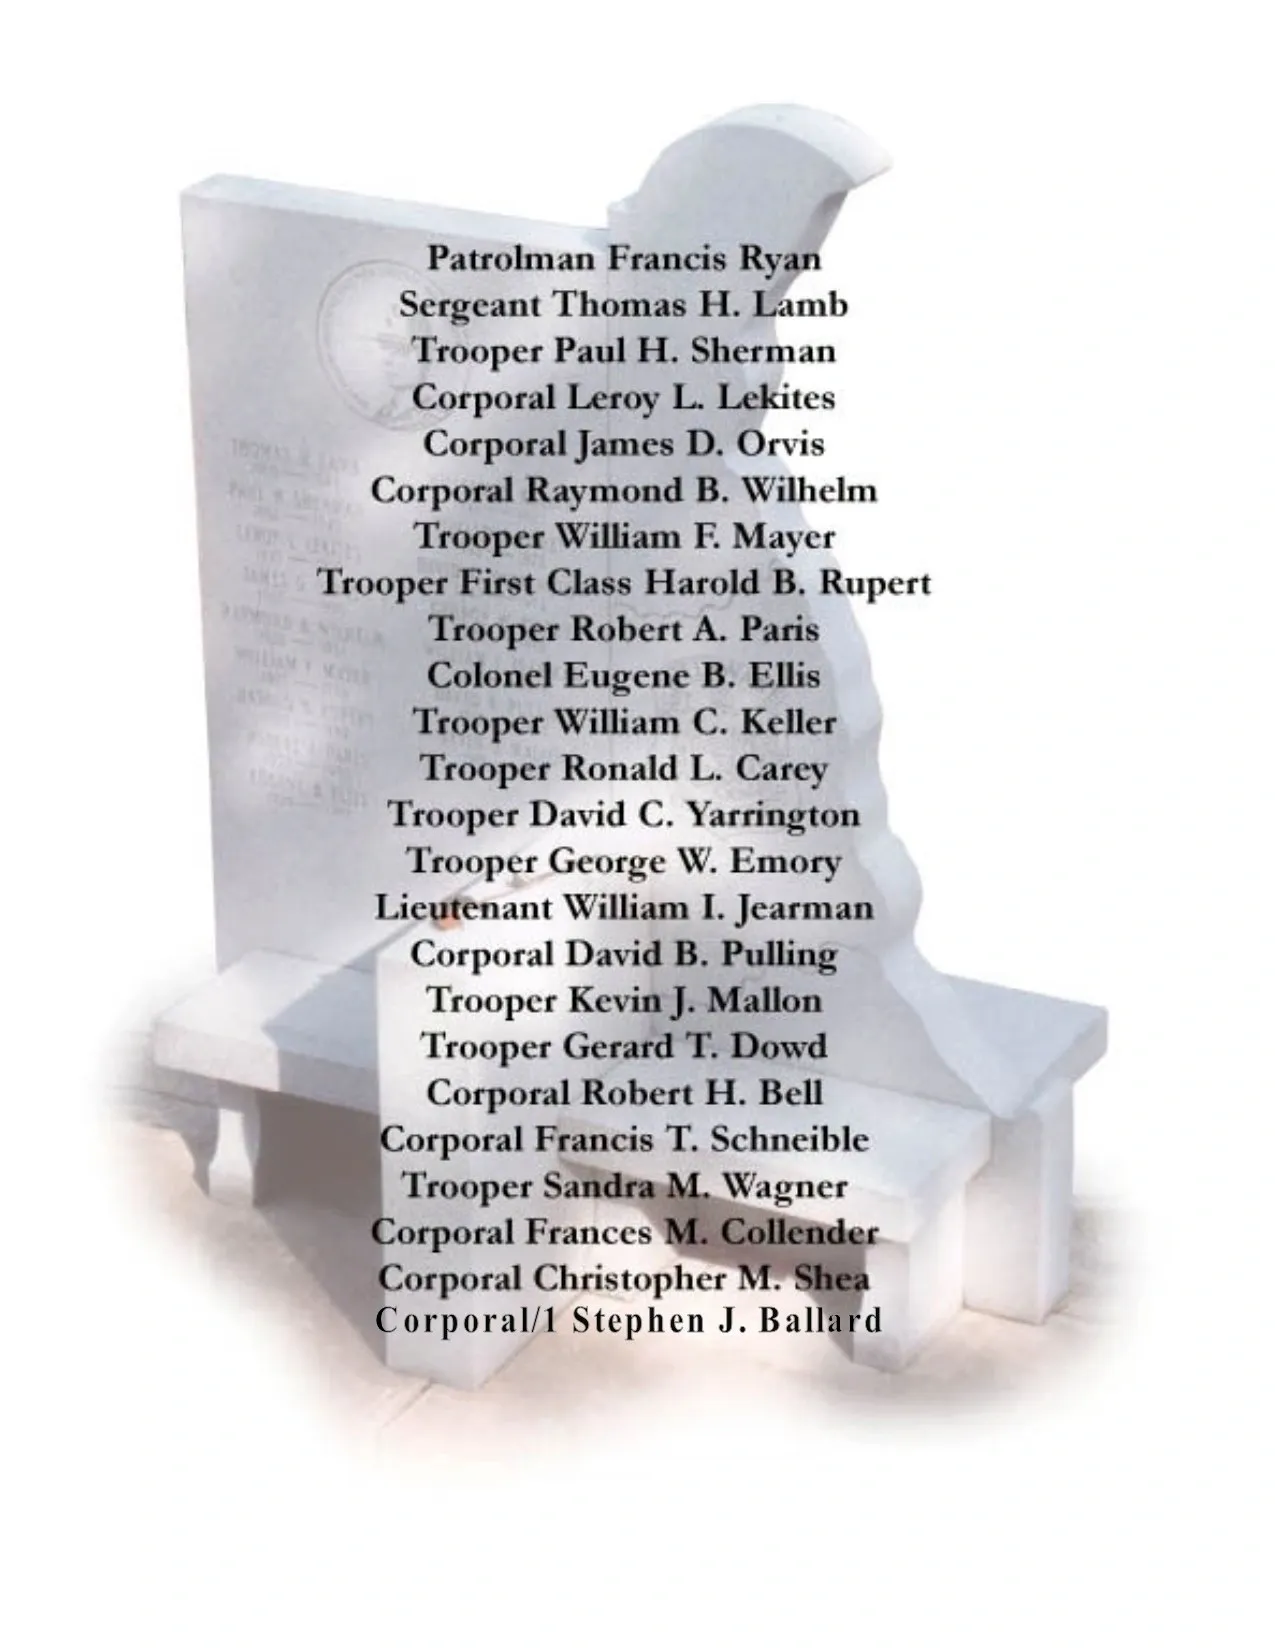 dsp memorial with names